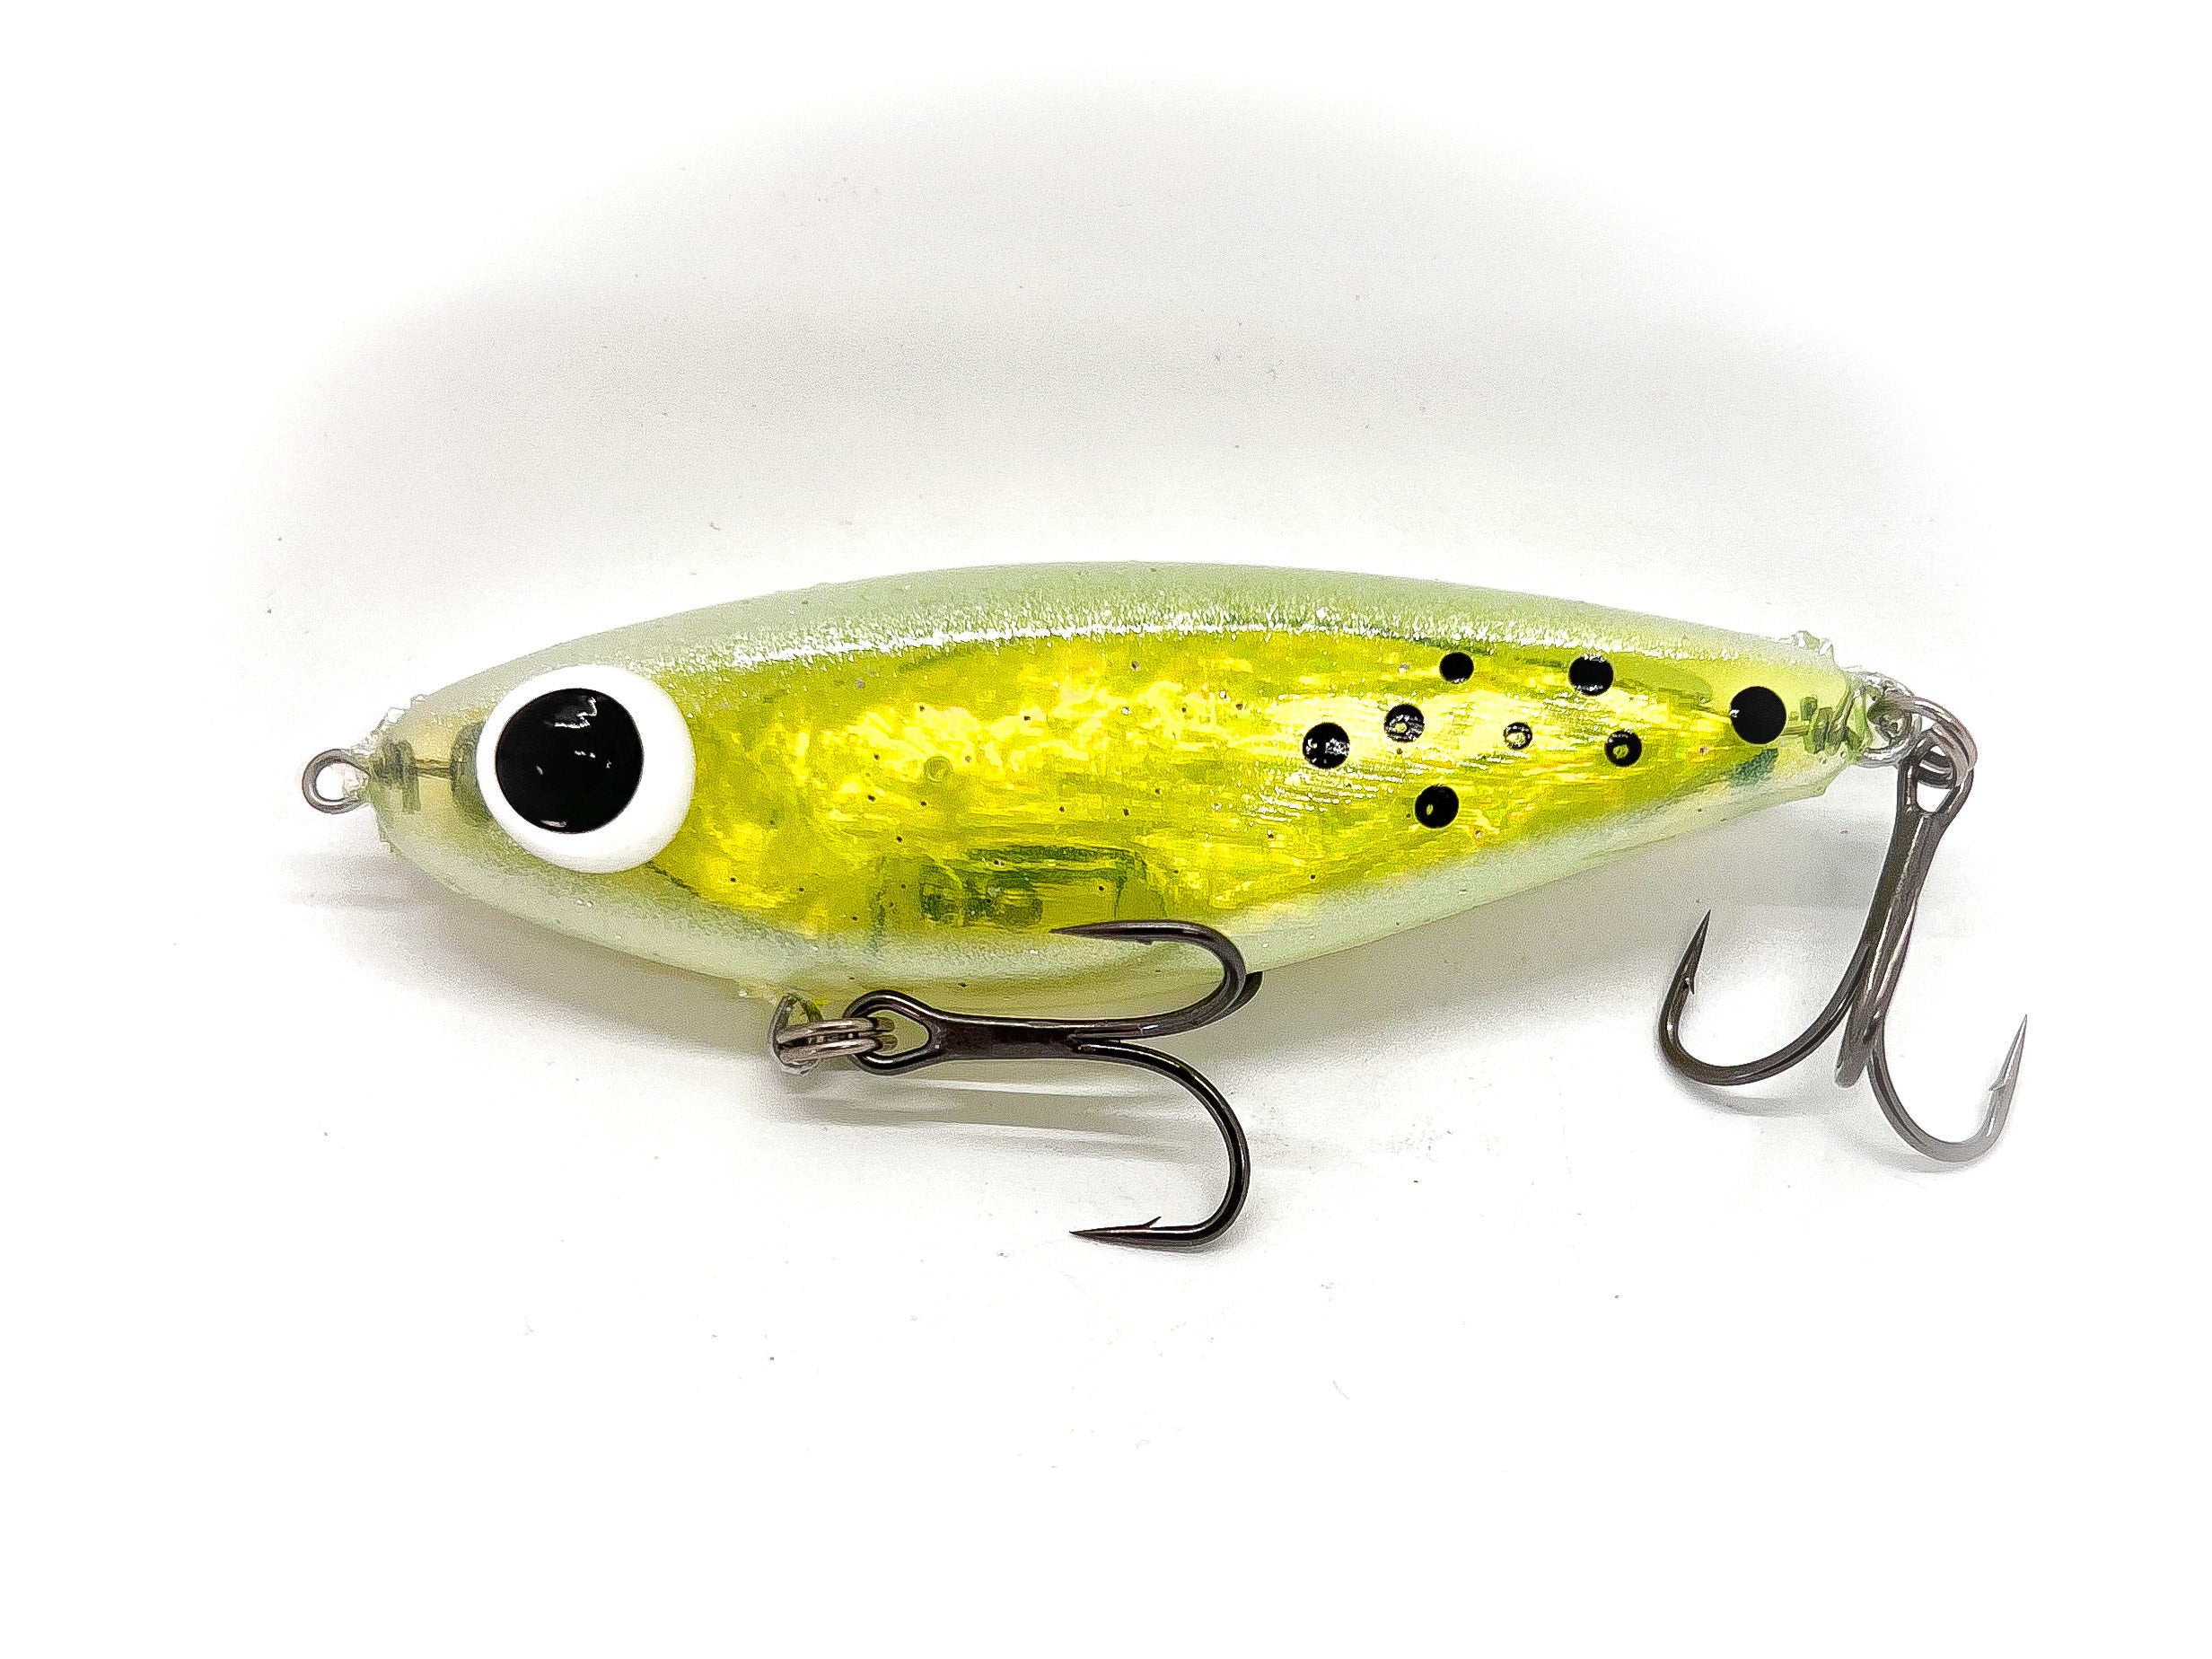 Proud to announce that we will be - Coastal Marsh Lures